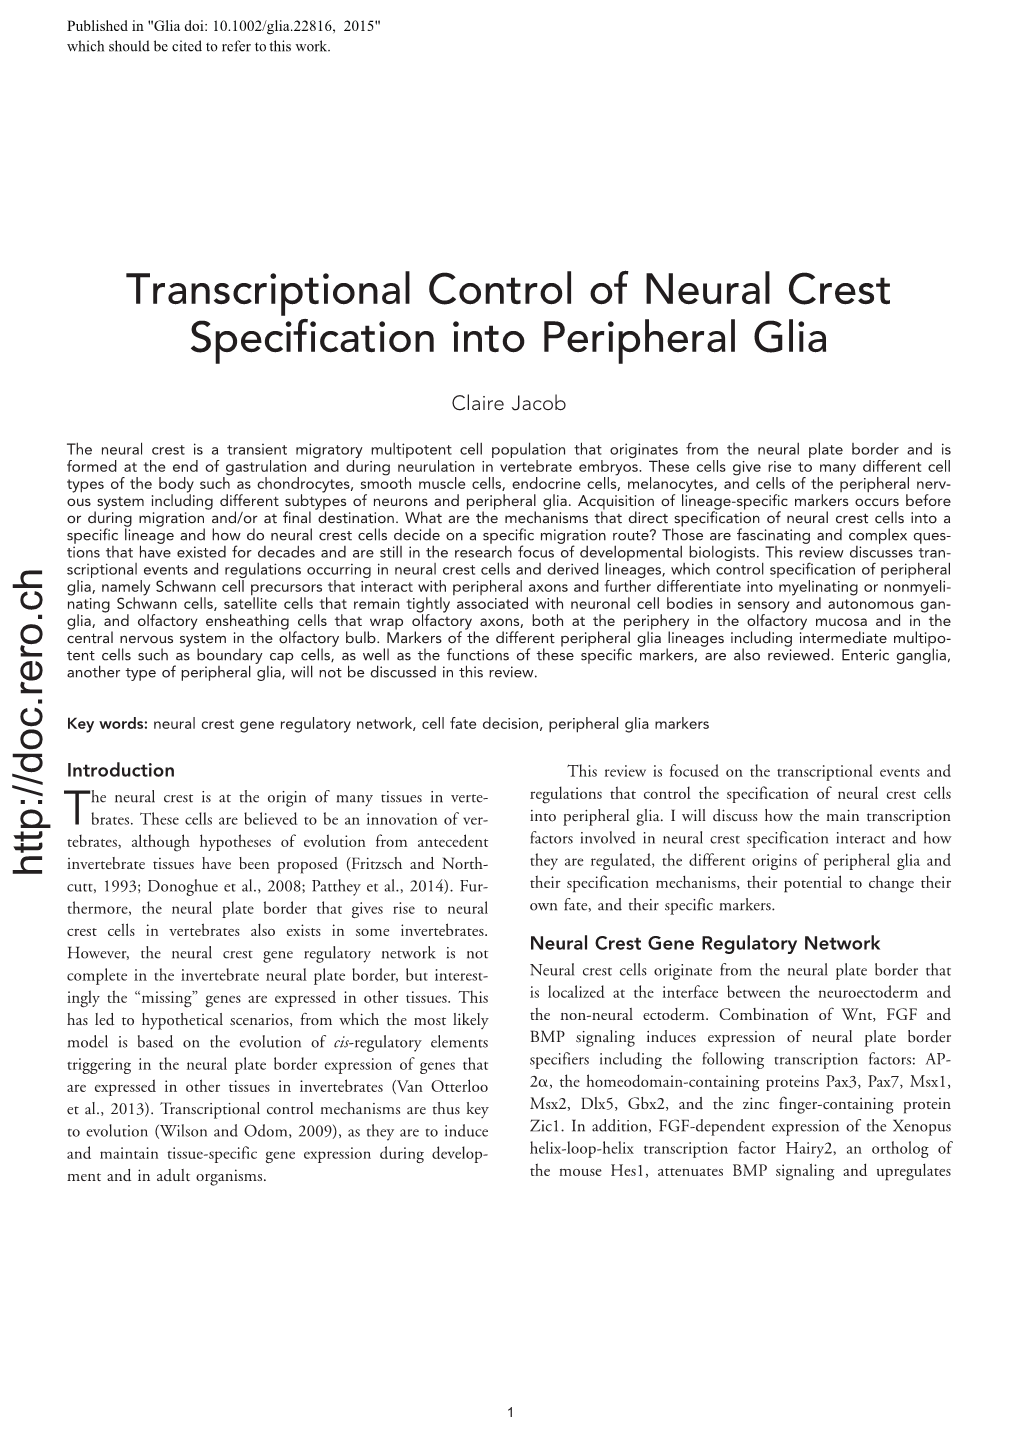 Transcriptional Control of Neural Crest Specification Into Peripheral Glia